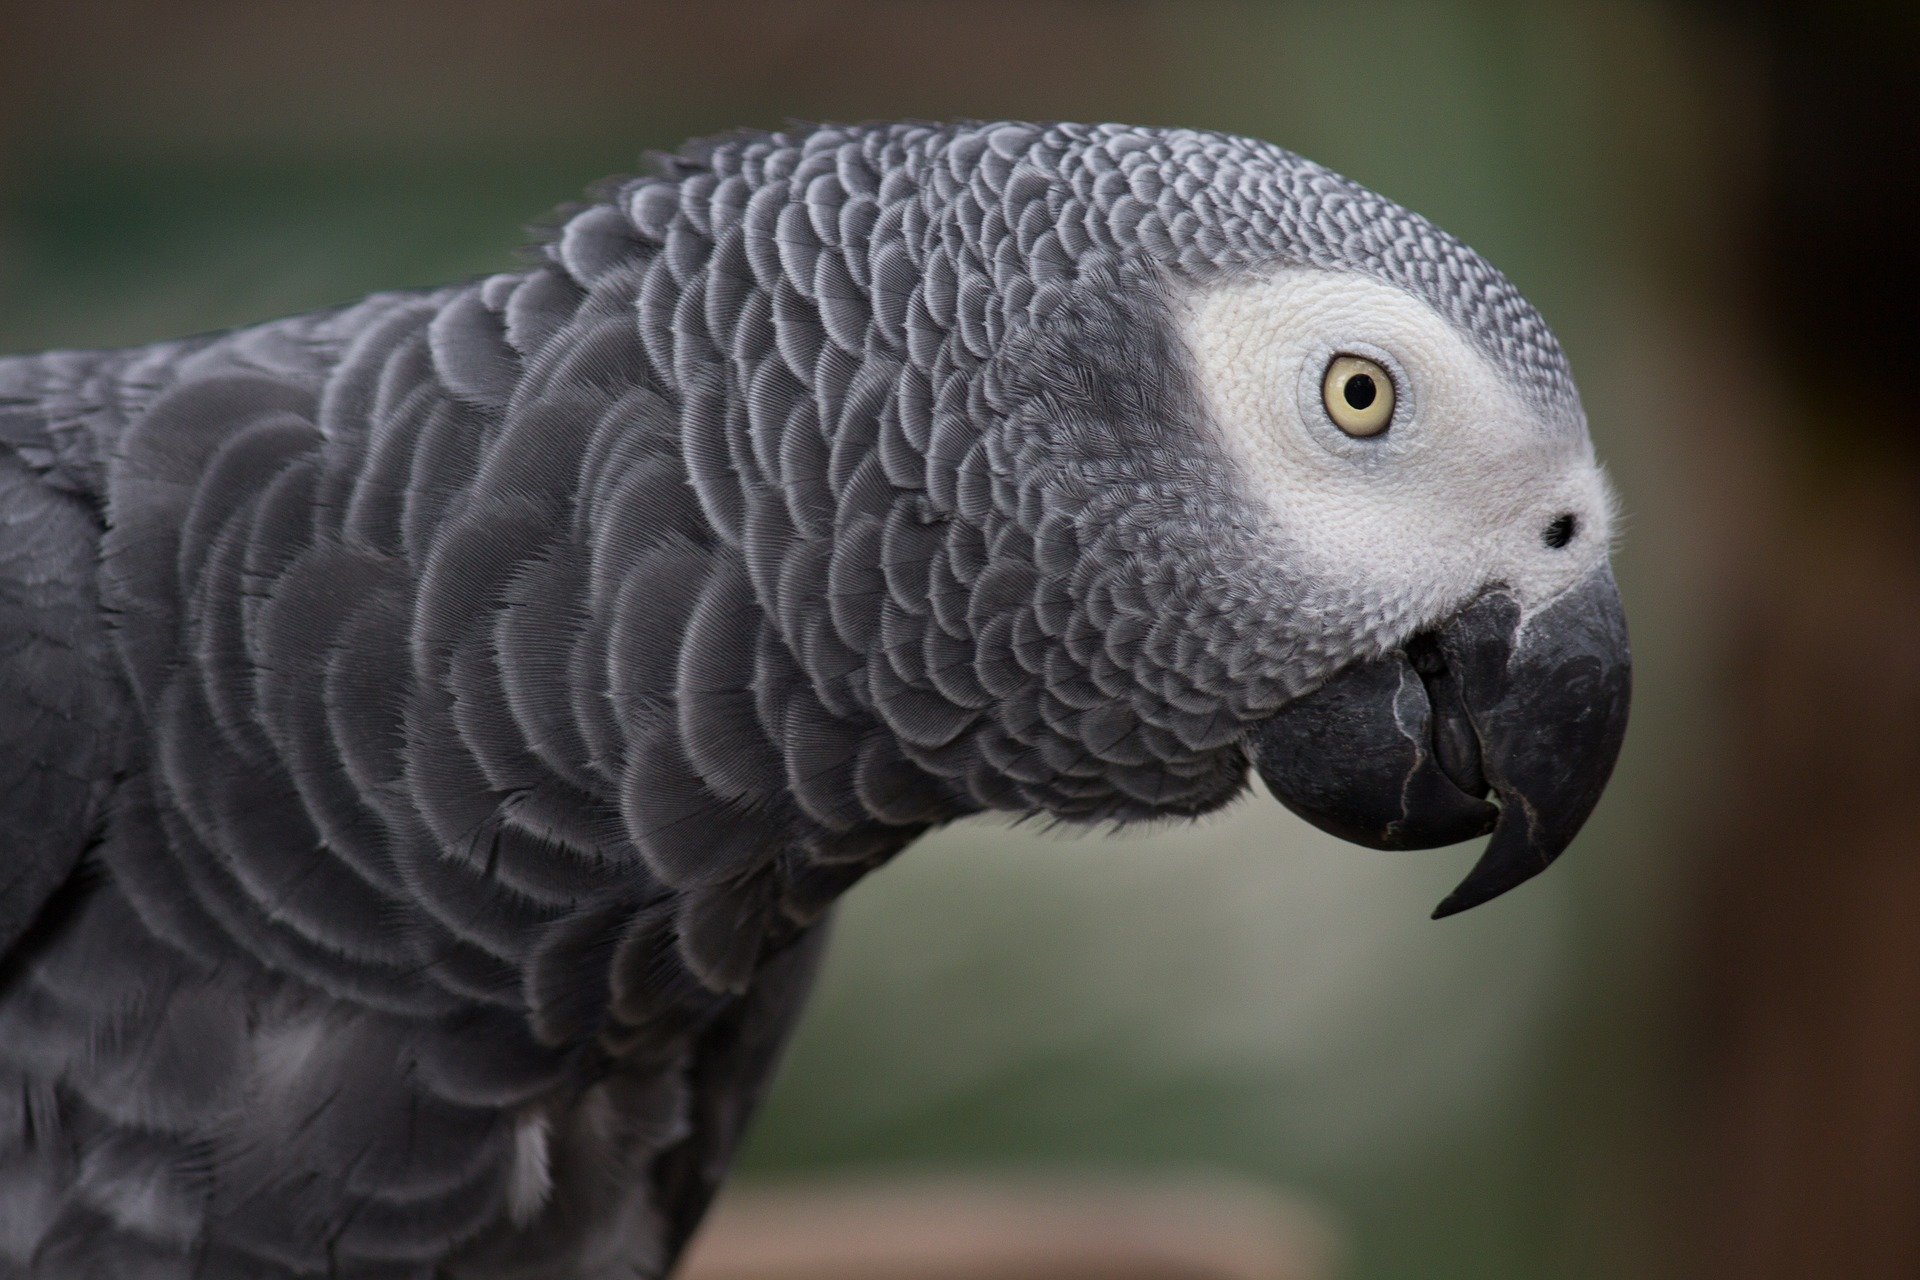 African grey parrot photo